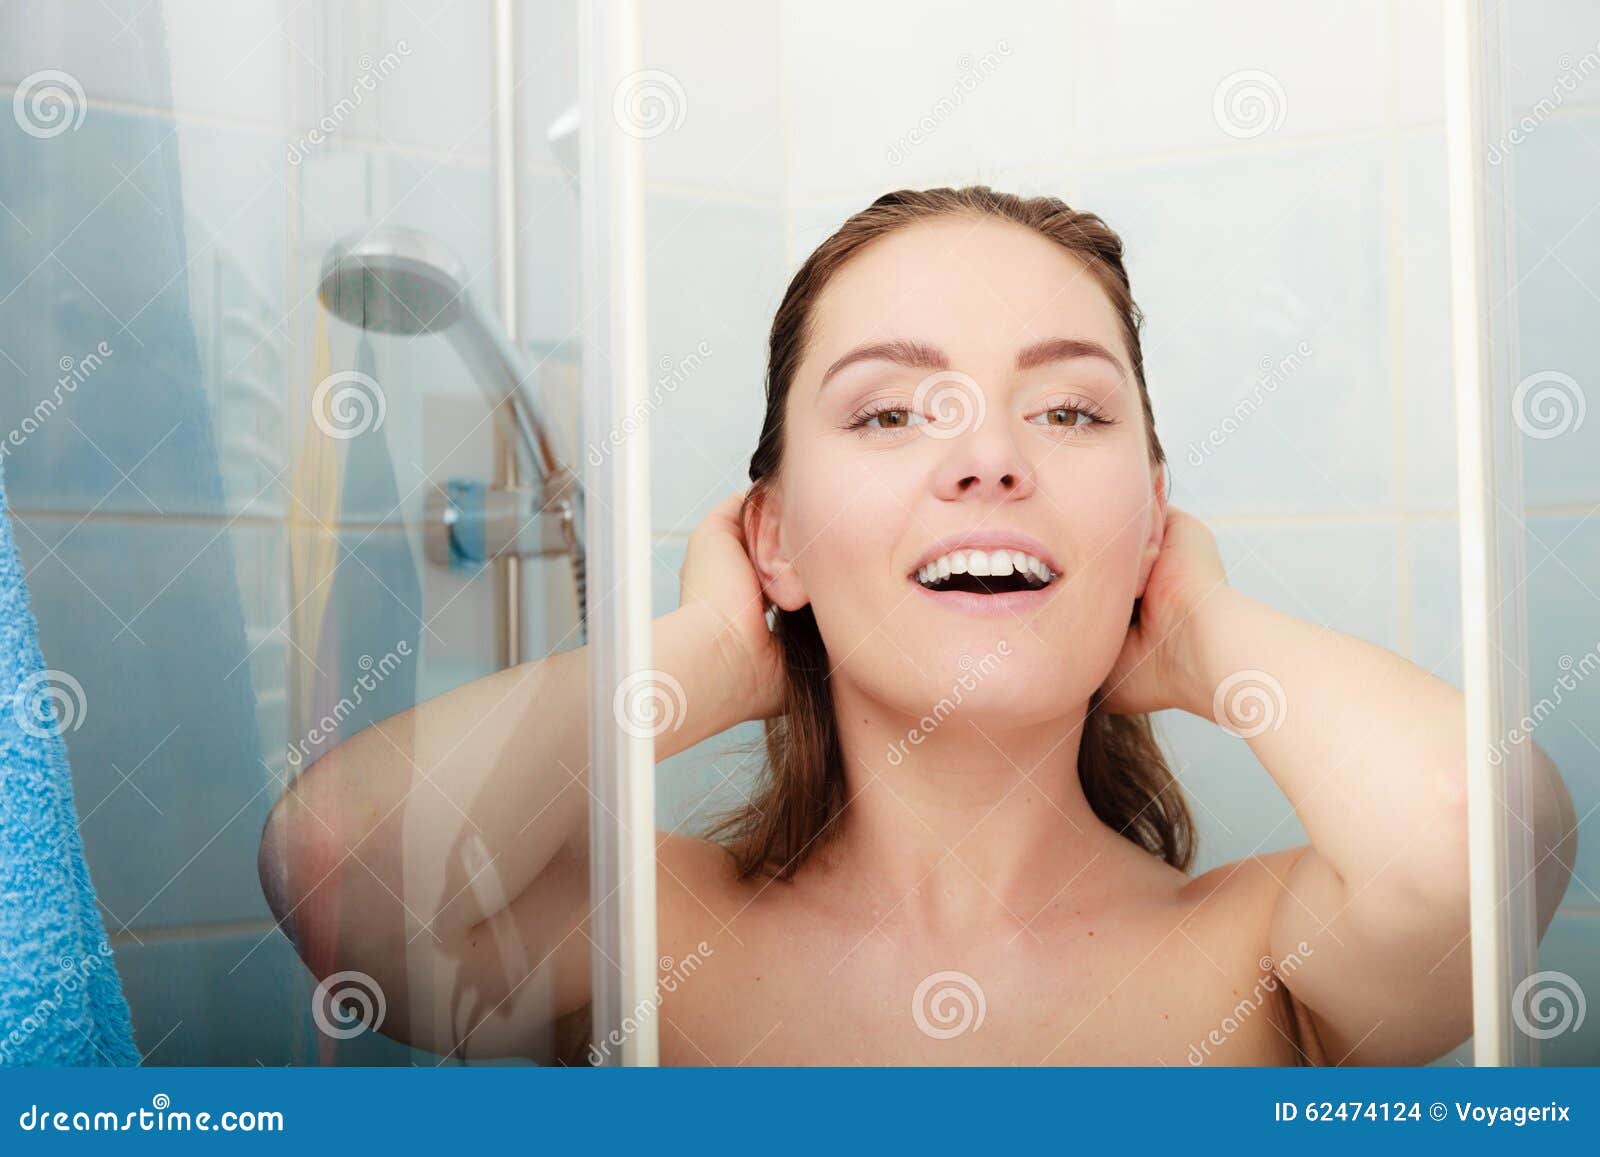 Woman Showering In Shower Cabin Cubicle Stock Photo